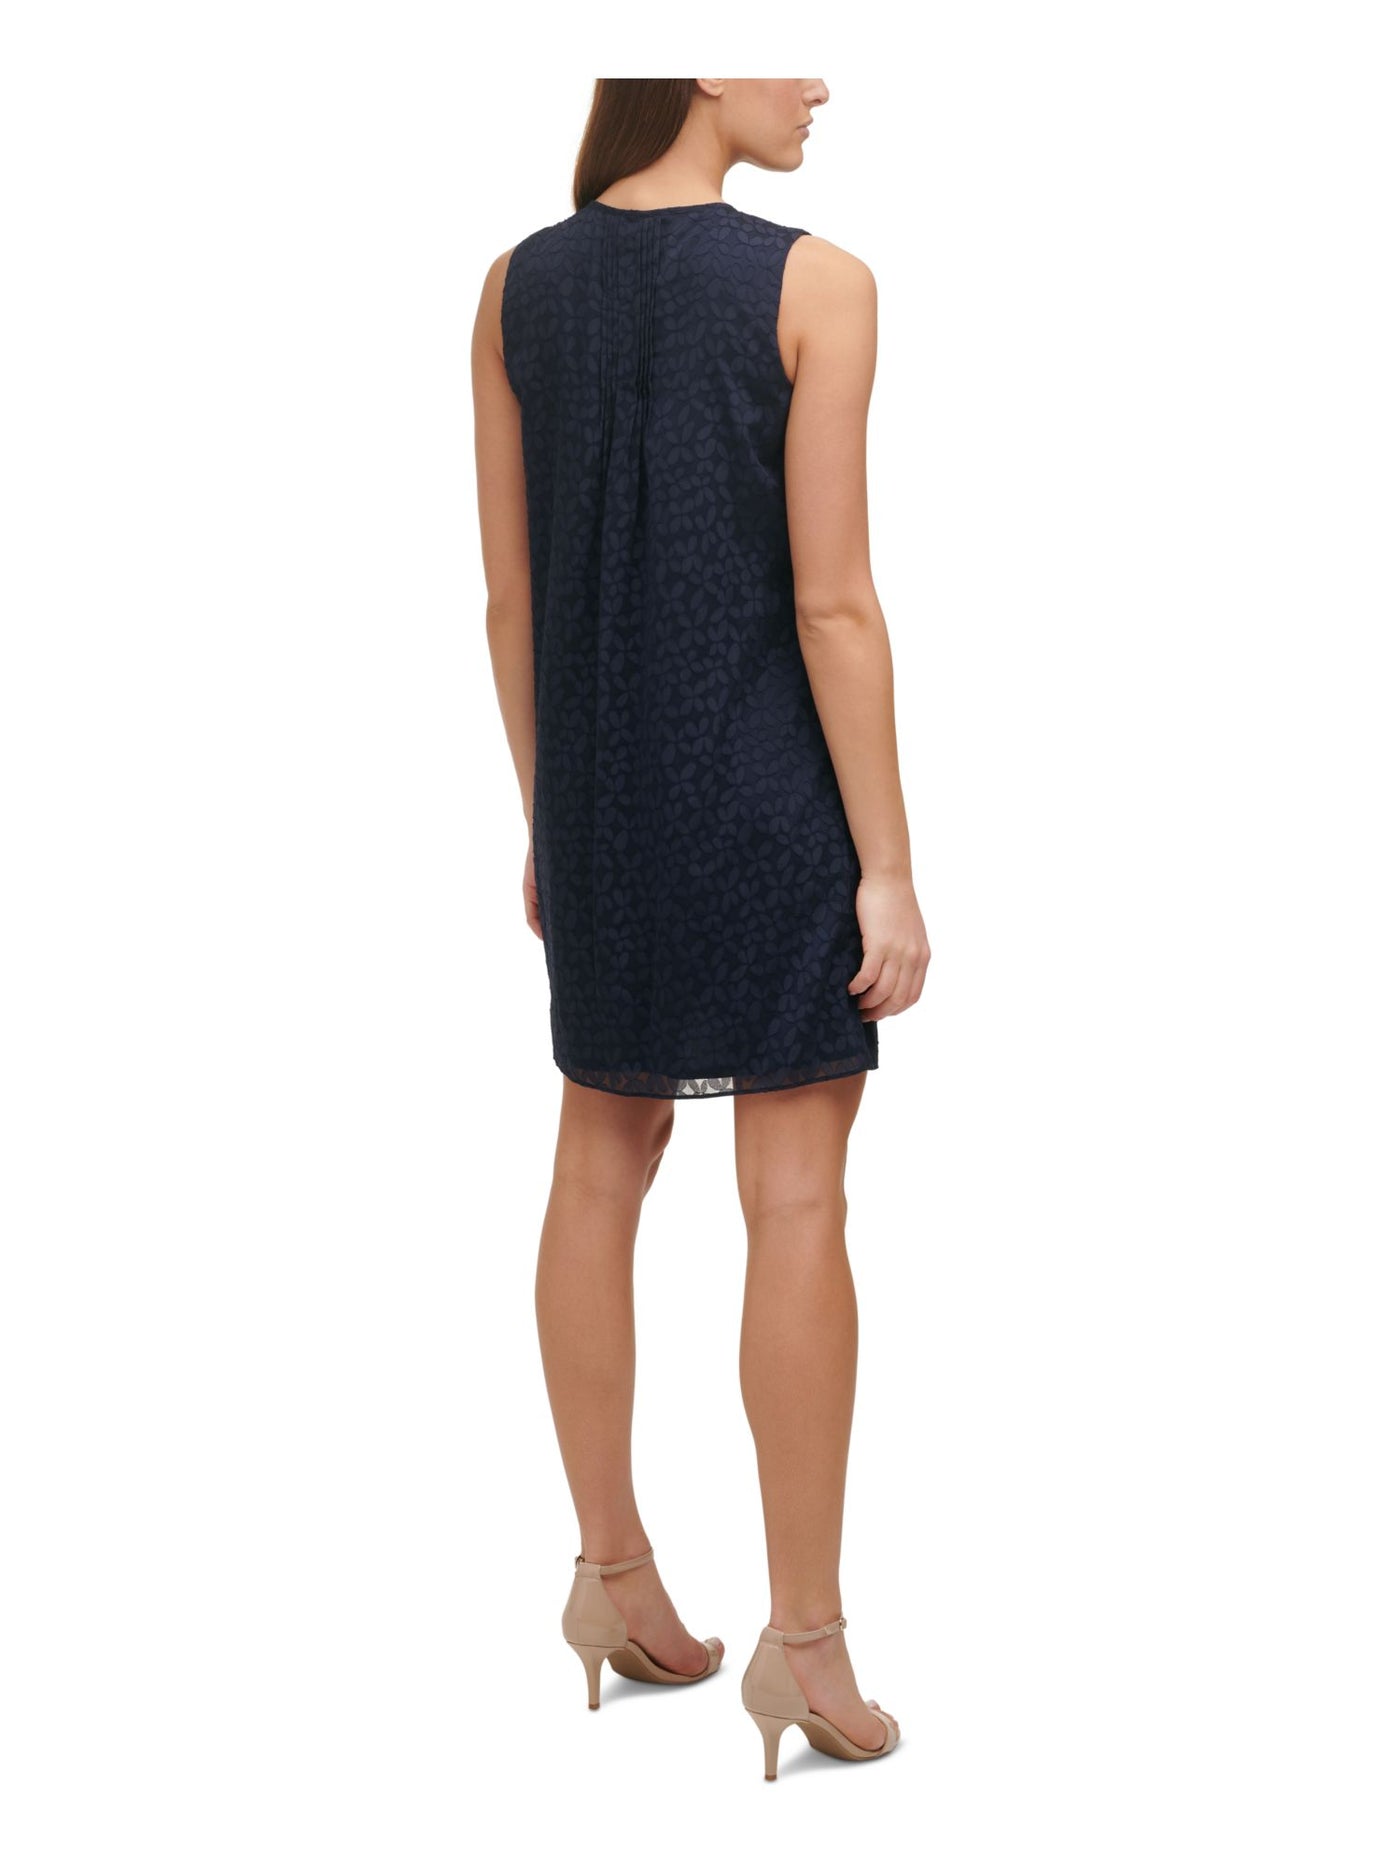 TOMMY HILFIGER Womens Navy Textured Pleated Lined Floral Sleeveless Keyhole Short Shift Dress 4